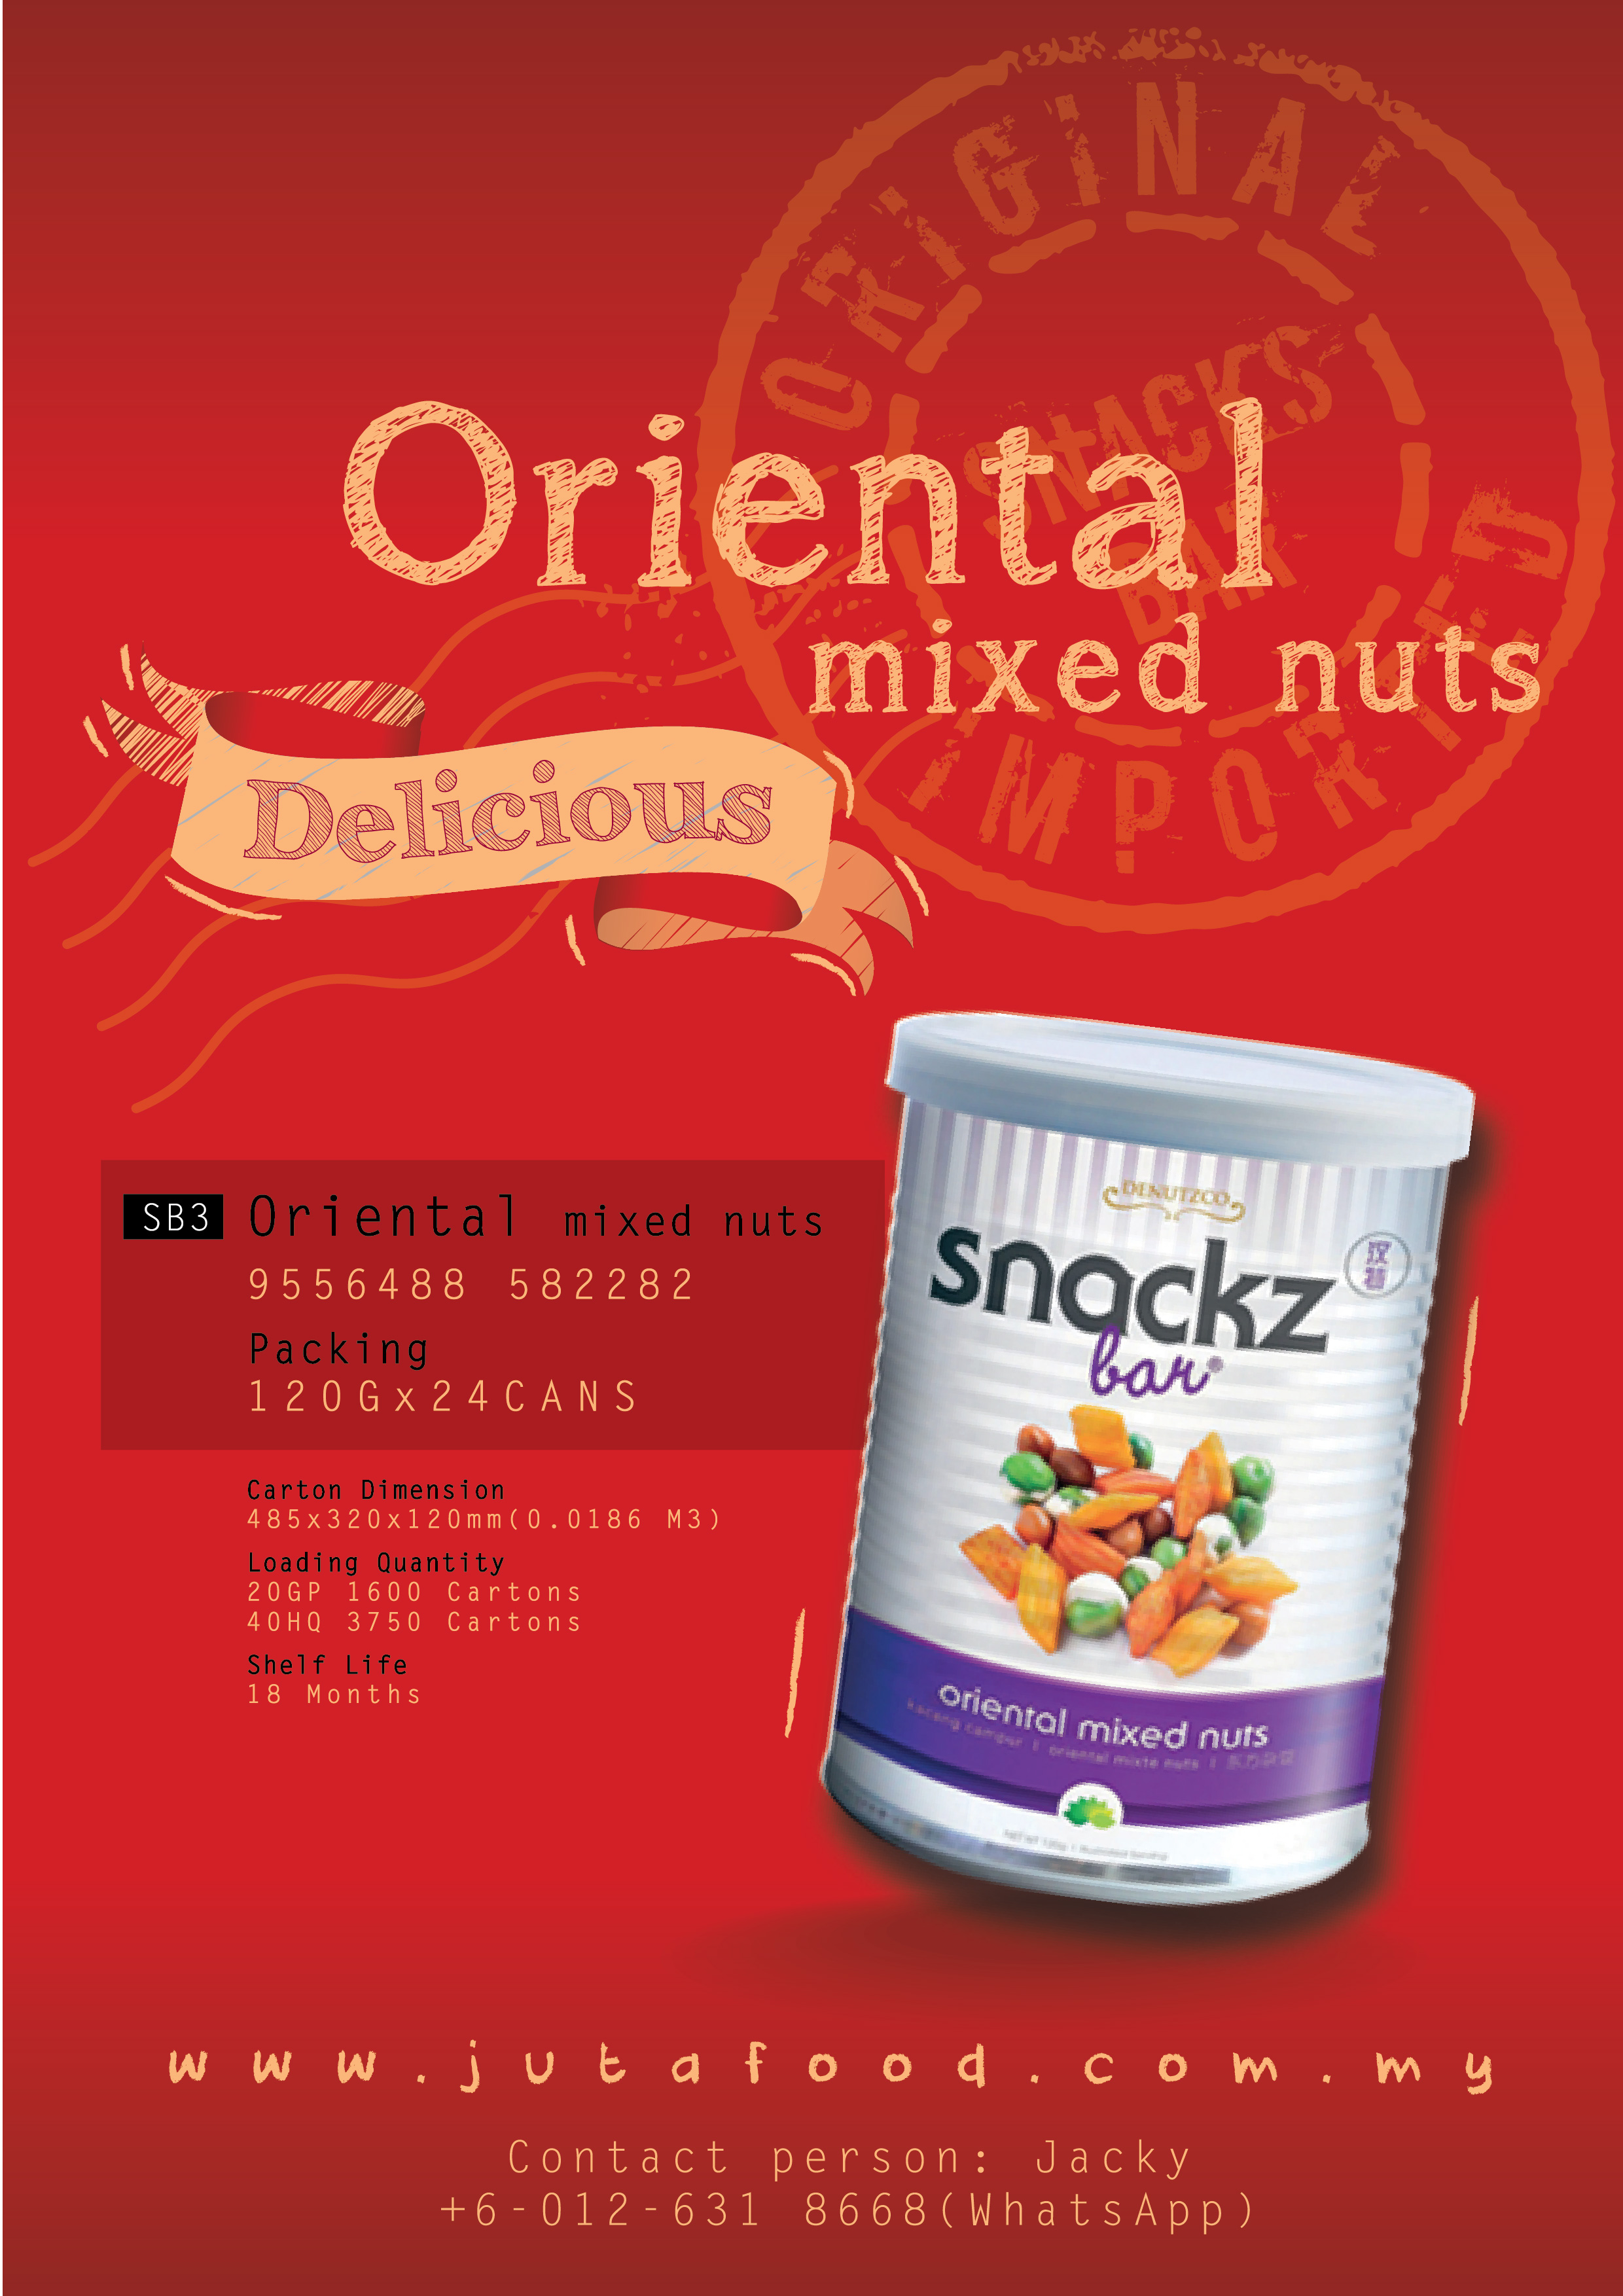 oriental-mied-nuts-110102